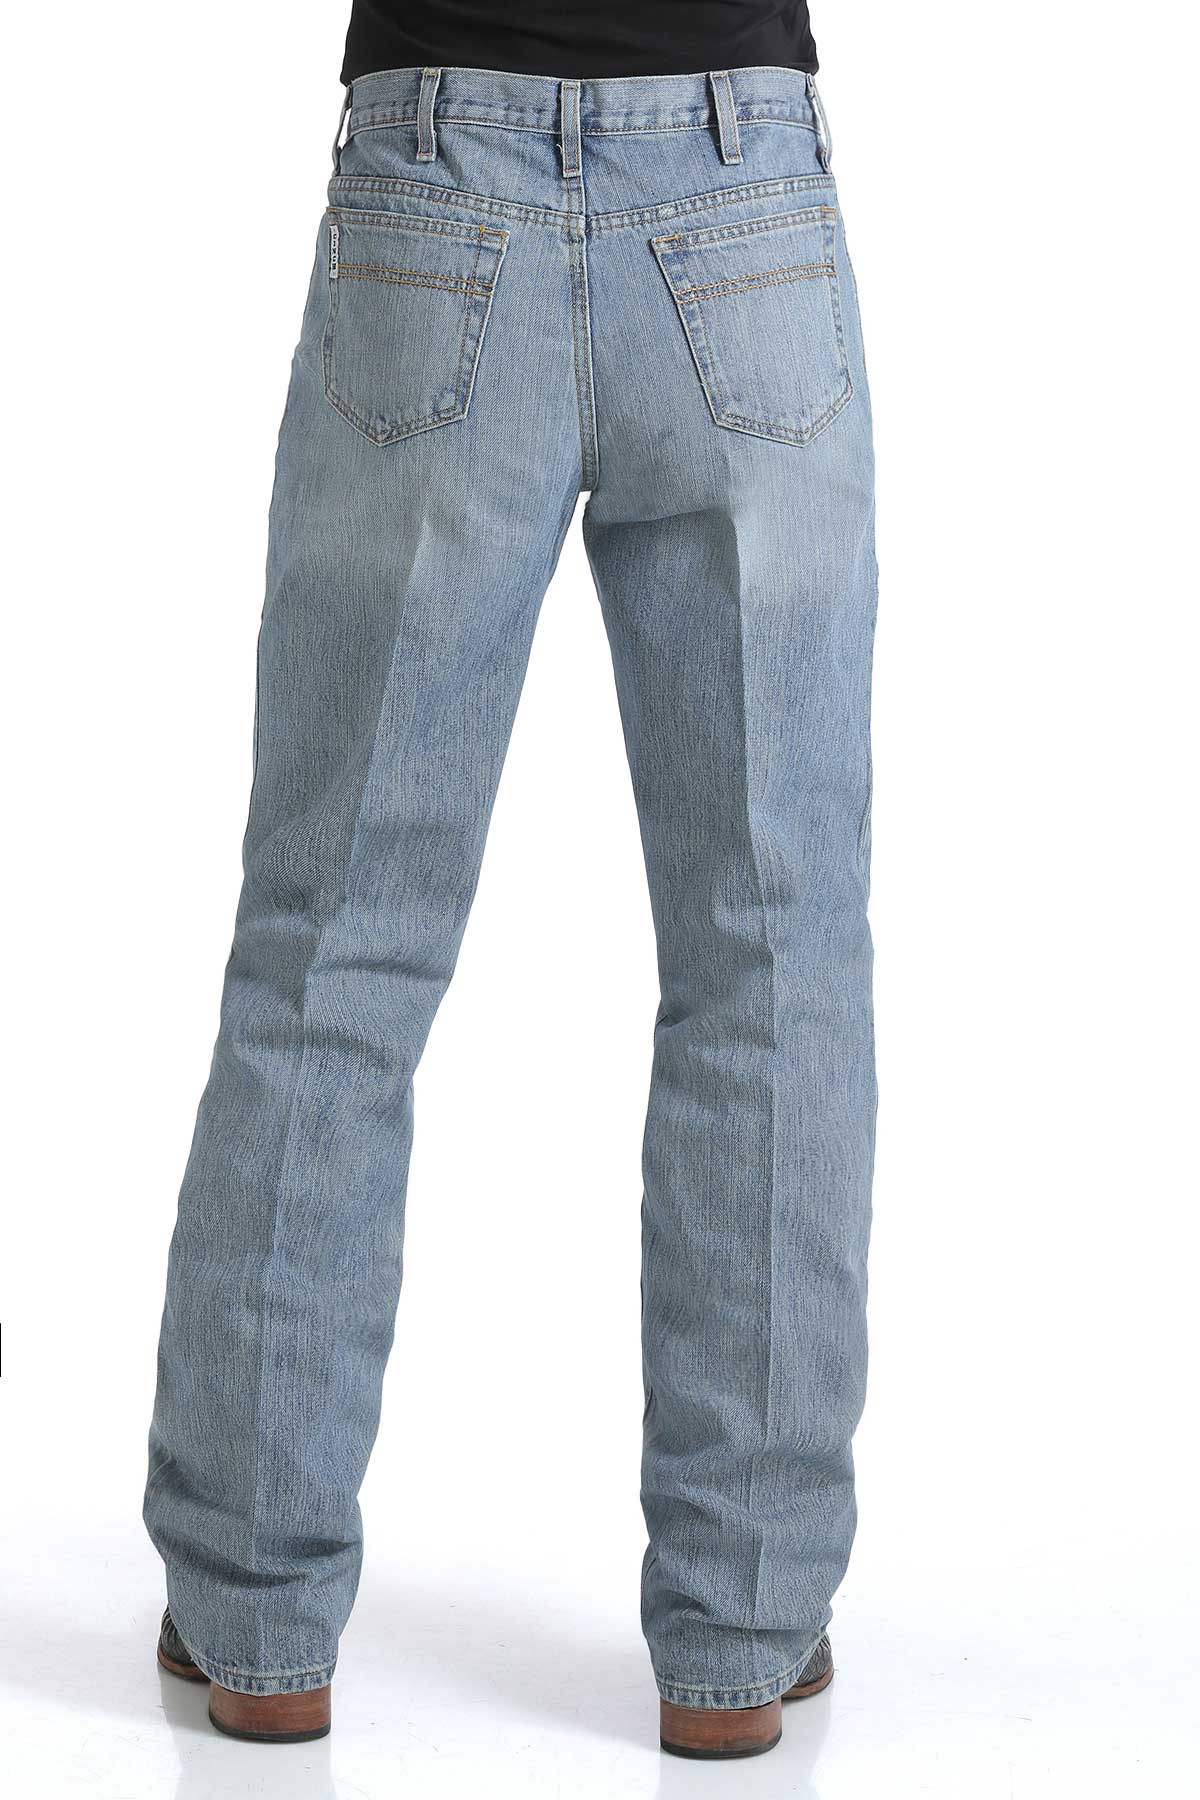 Cinch Men's White Label Relaxed Straight in Light Stonewash